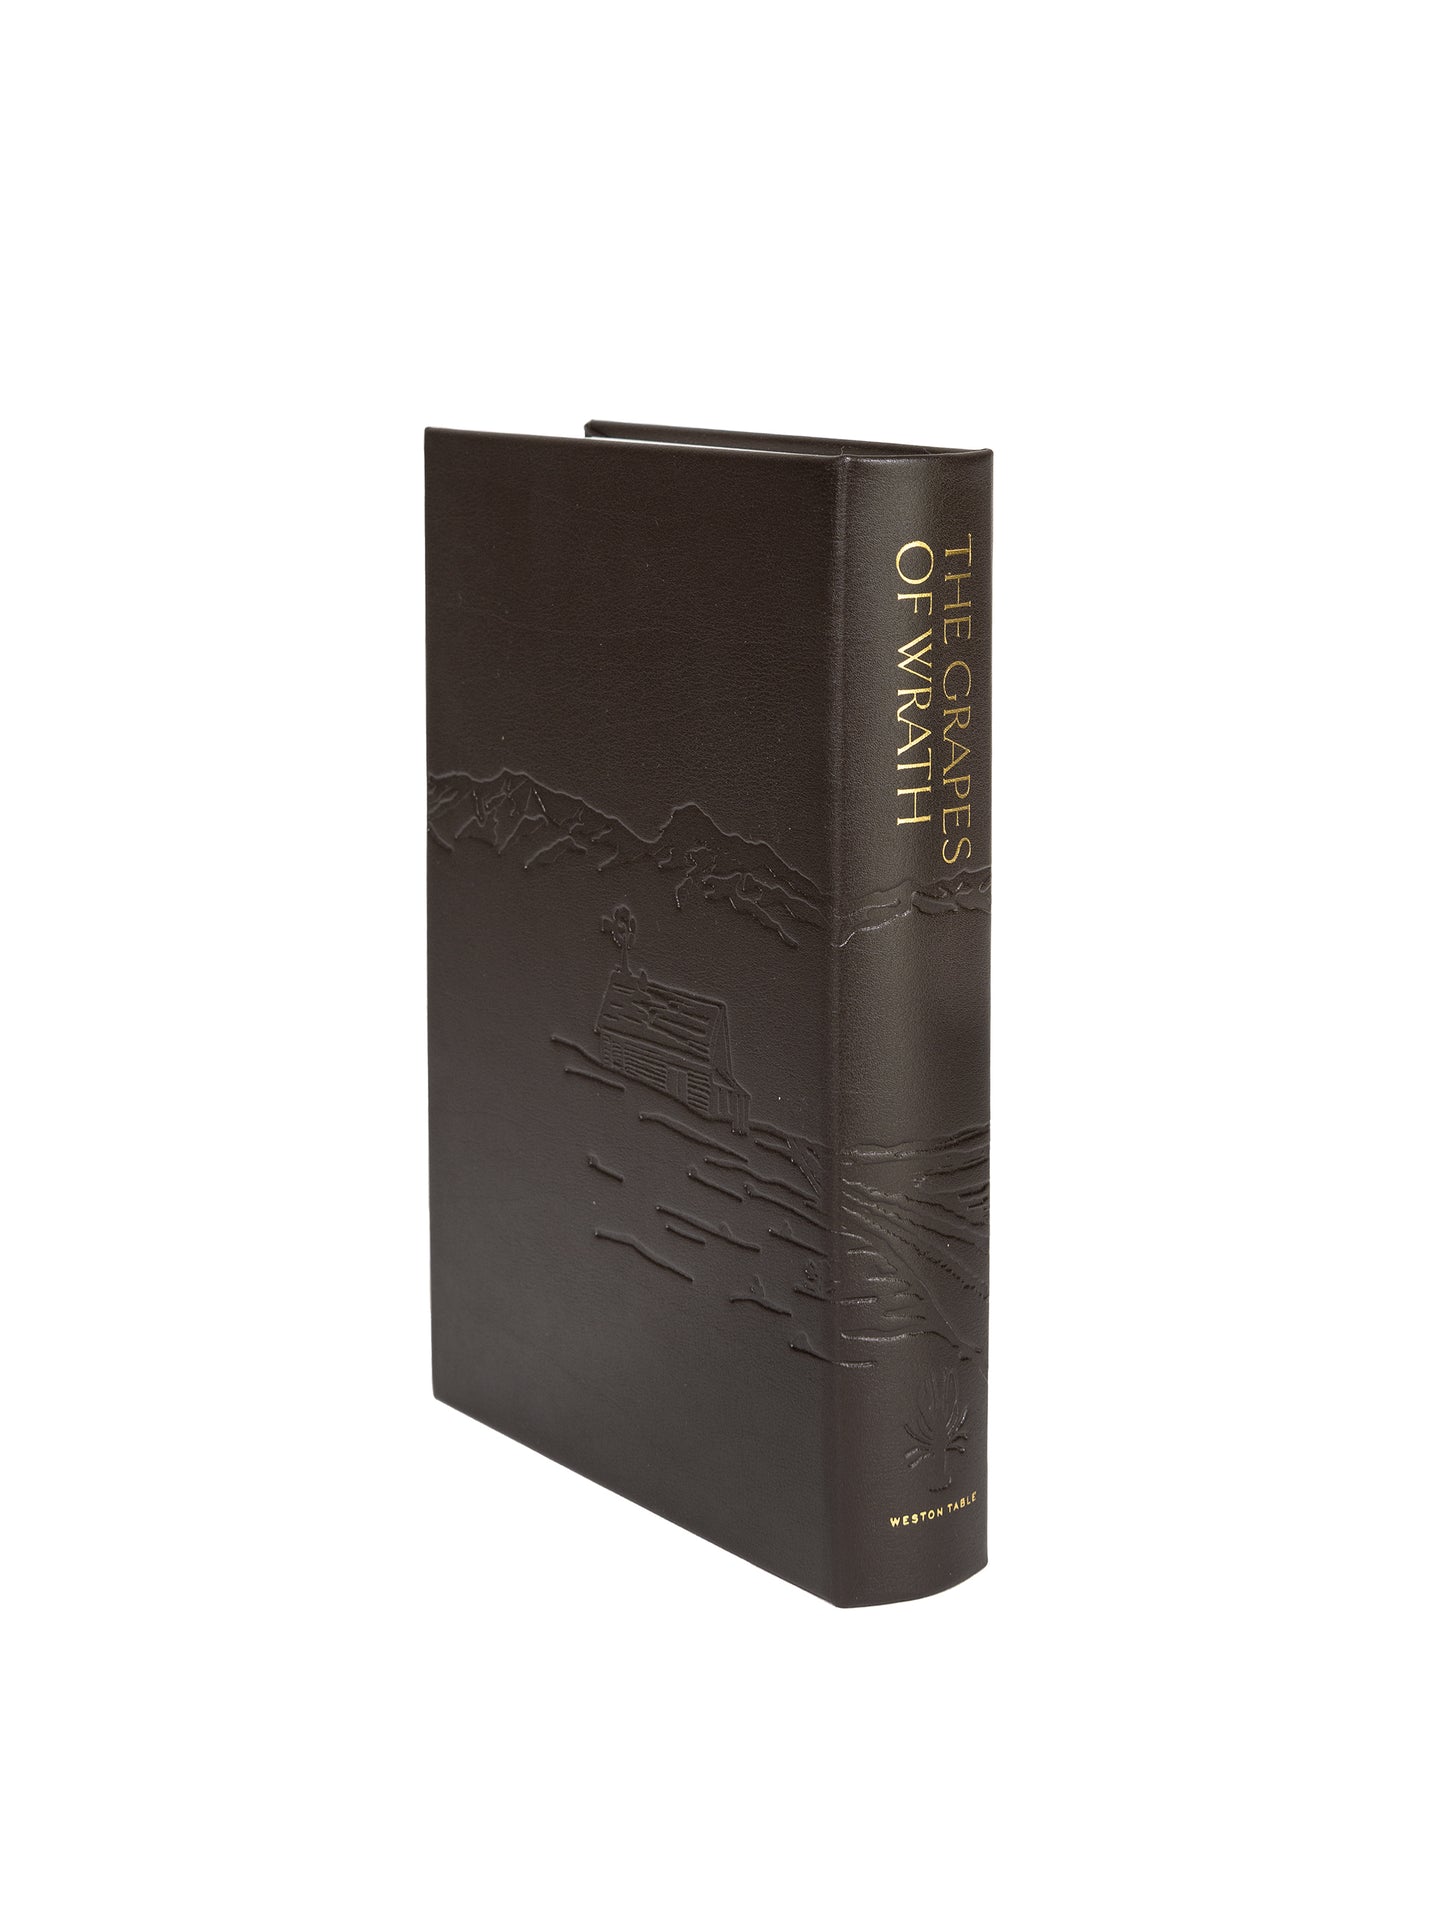 The Grapes of Wrath Leather Bound Edition